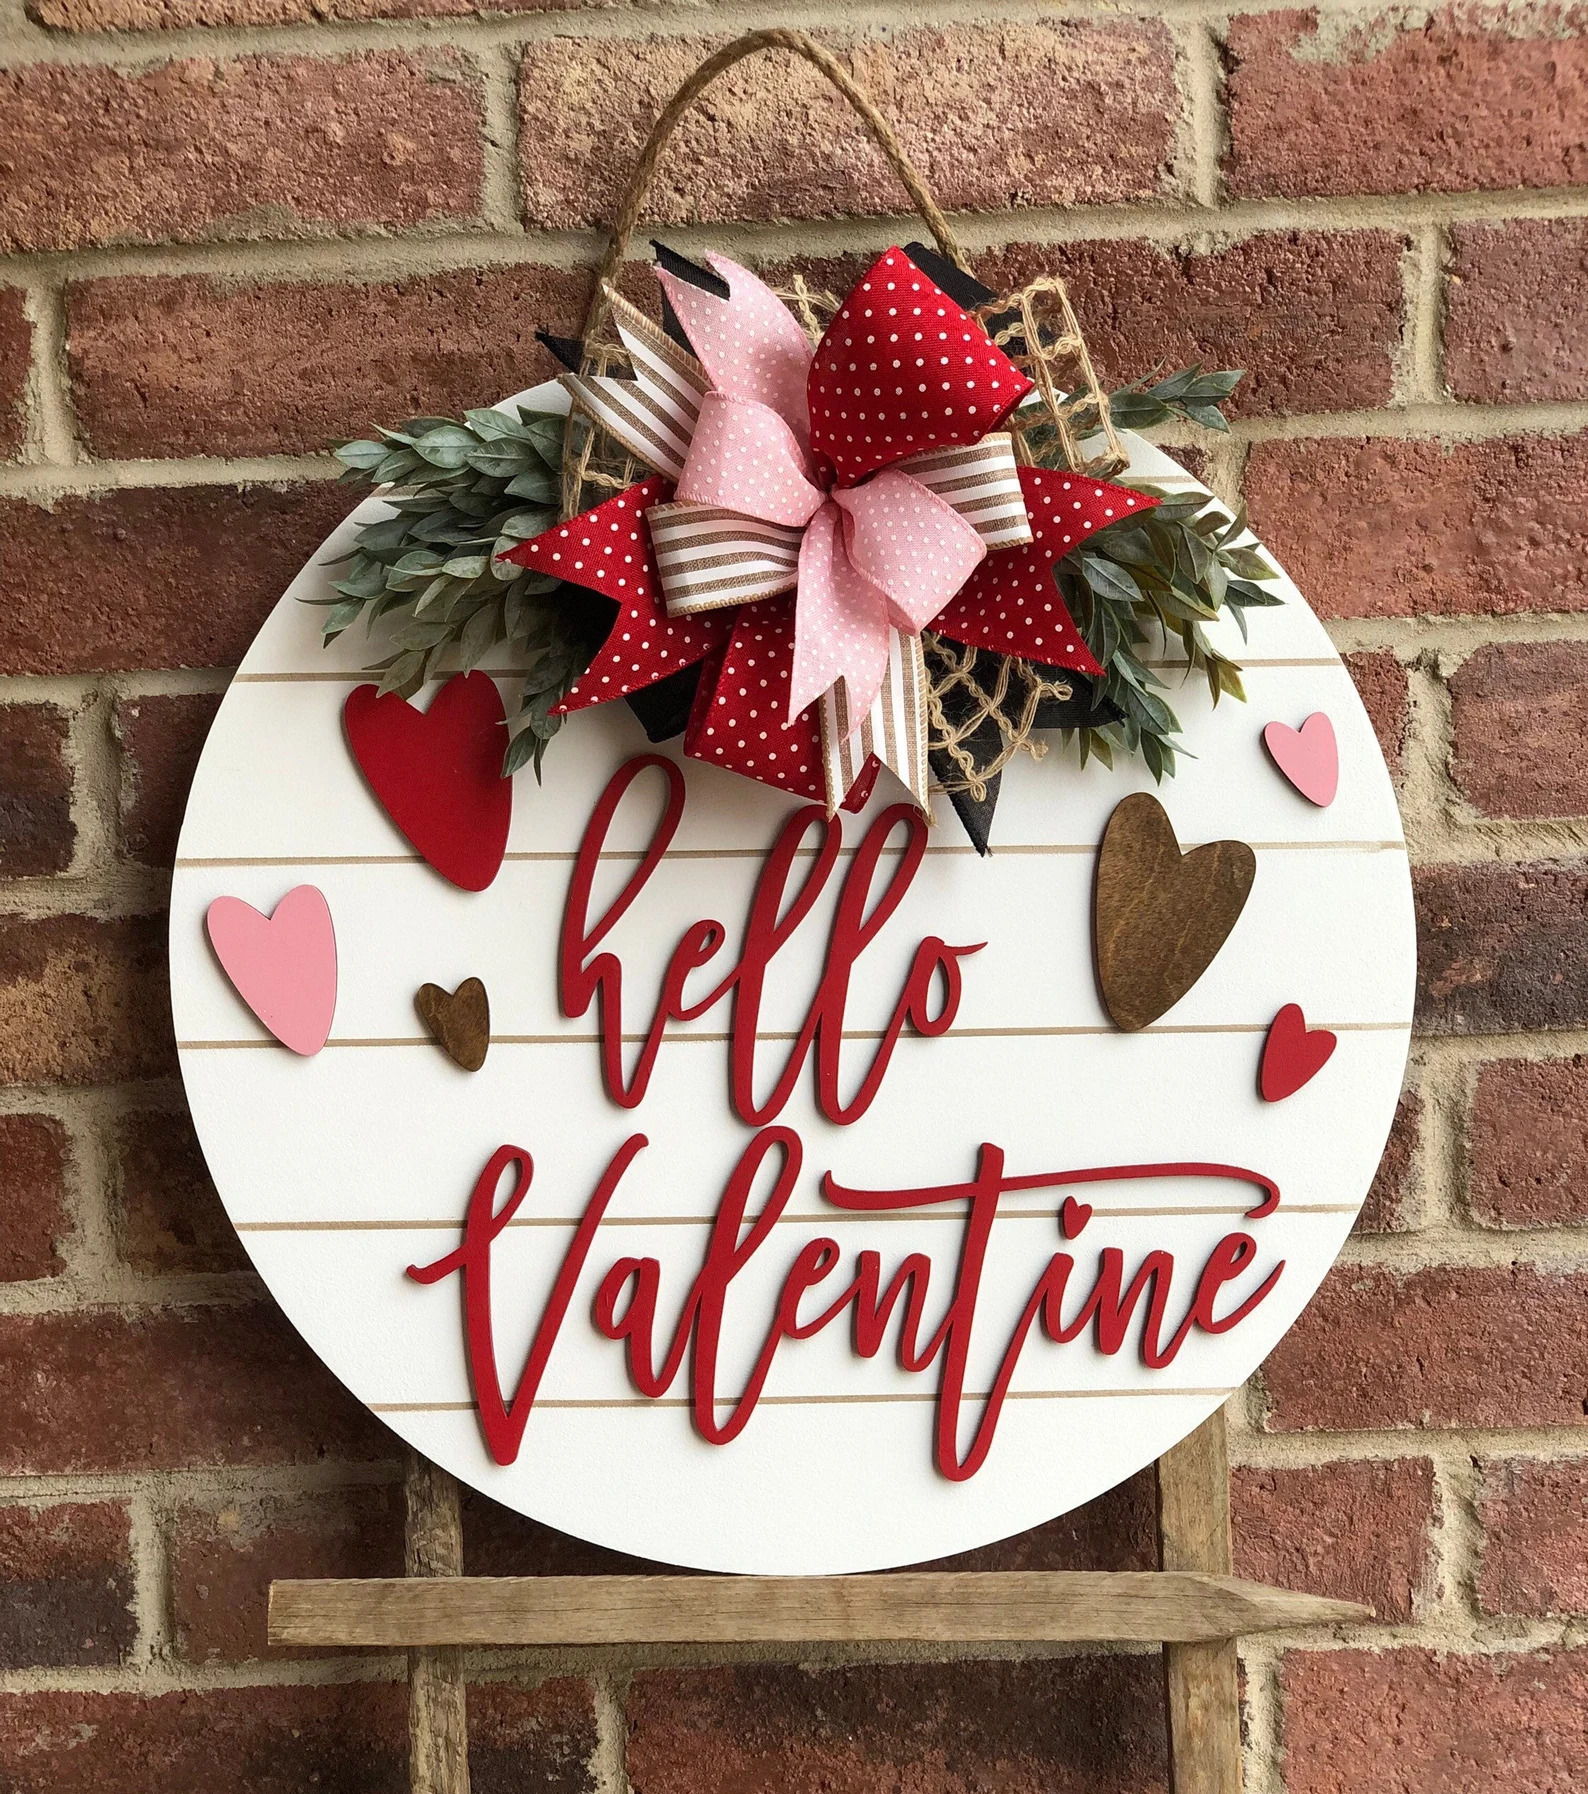 17 Cute Valentine's Day Wreath Designs To Hang Up On Your Front Door